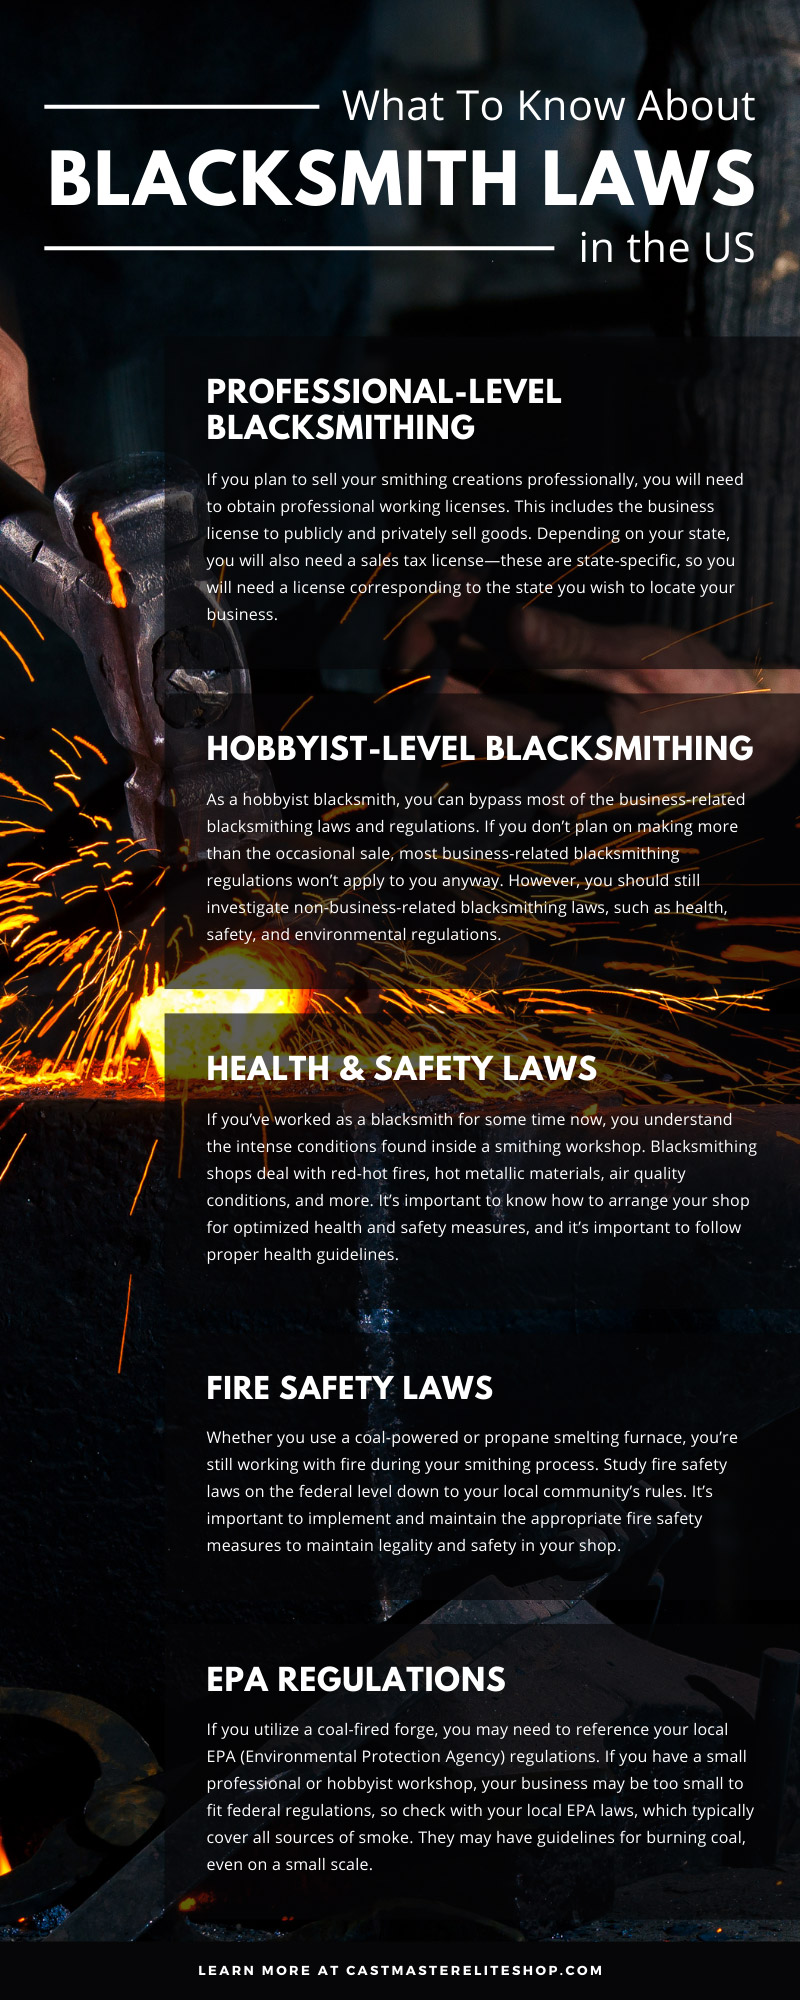 What To Know About Blacksmith Laws in the US